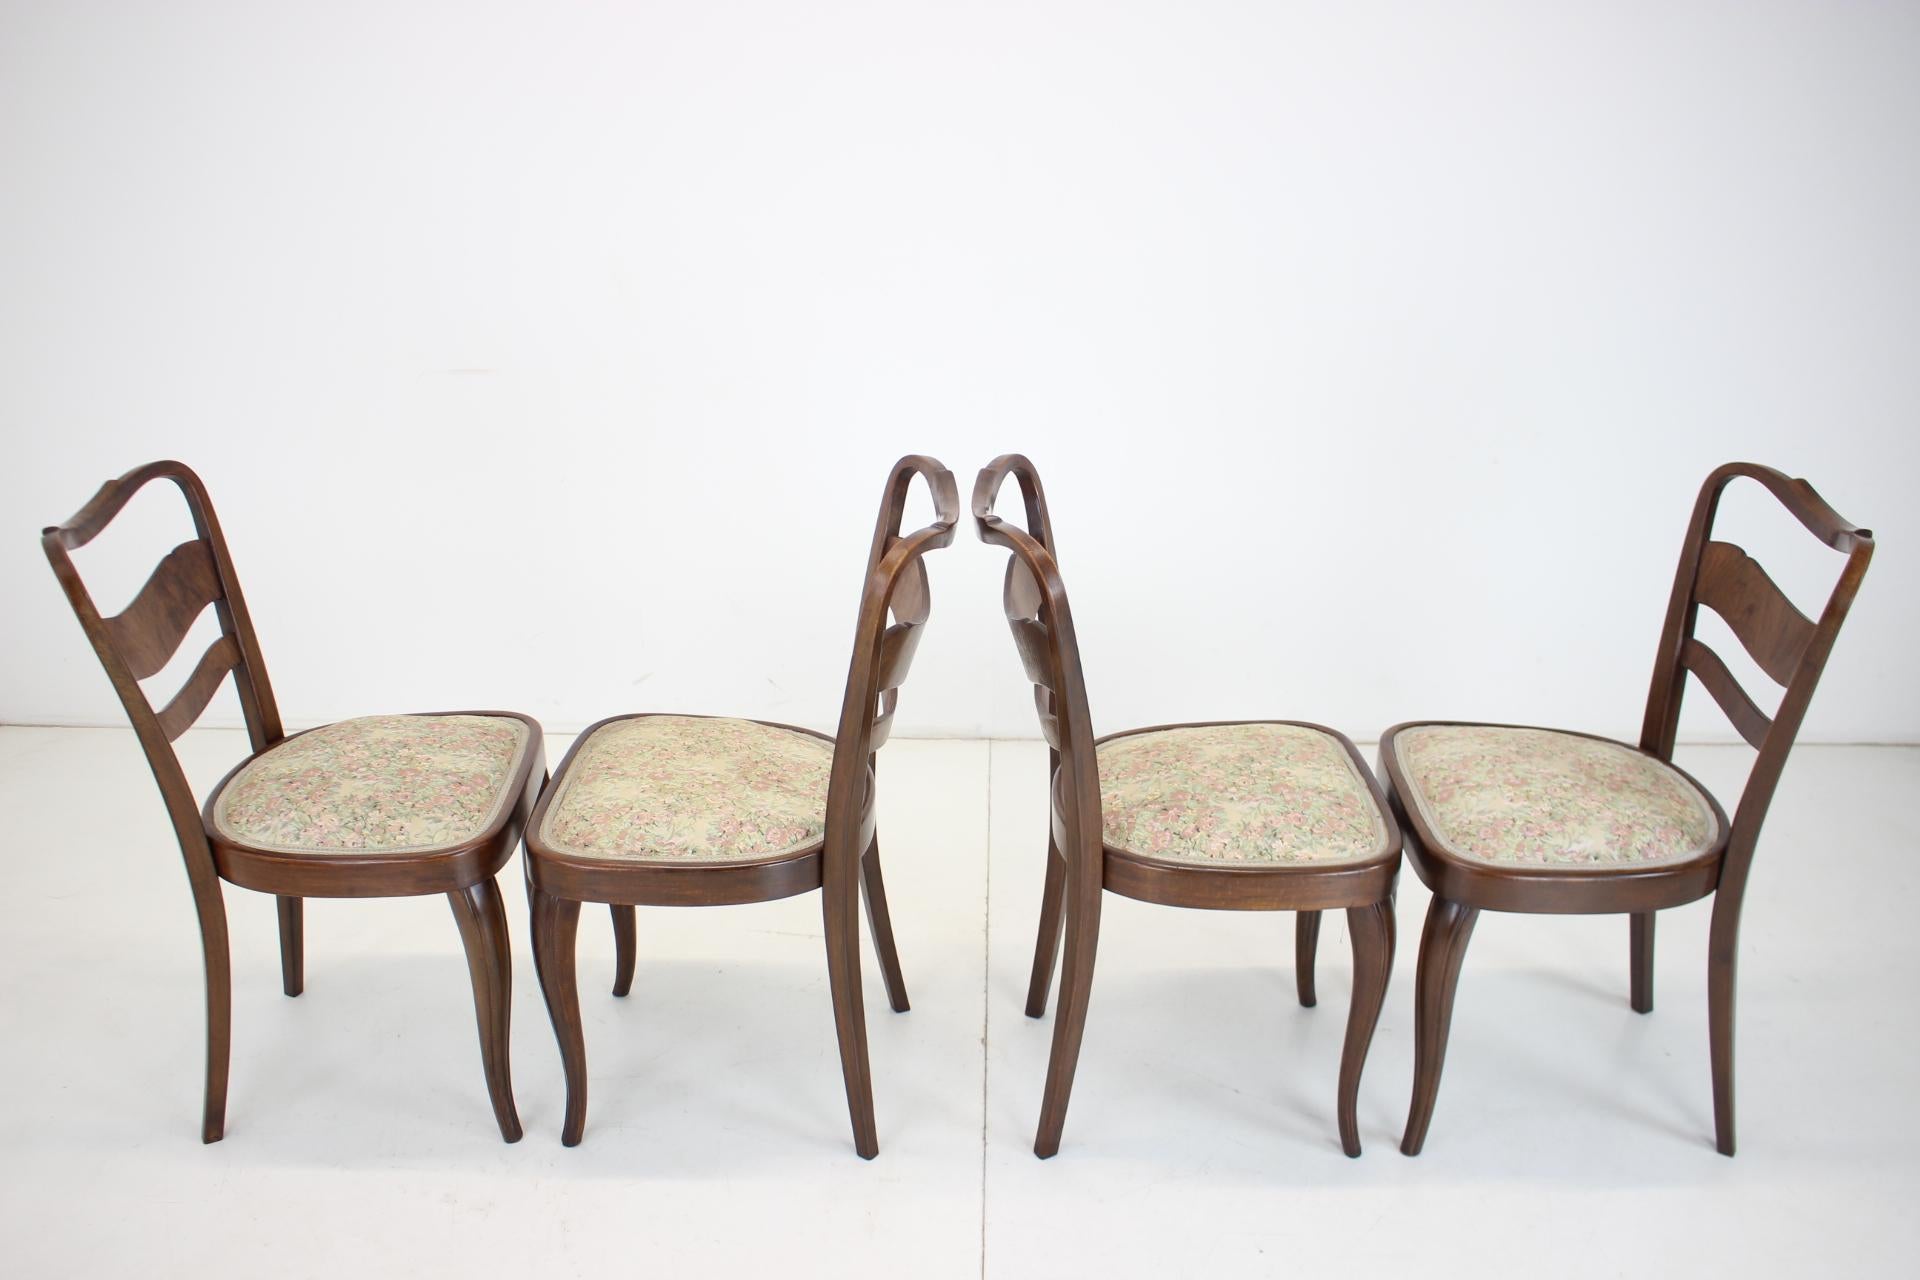 1940s Set of 4 Dining Chairs, Czechoslovakia For Sale 4